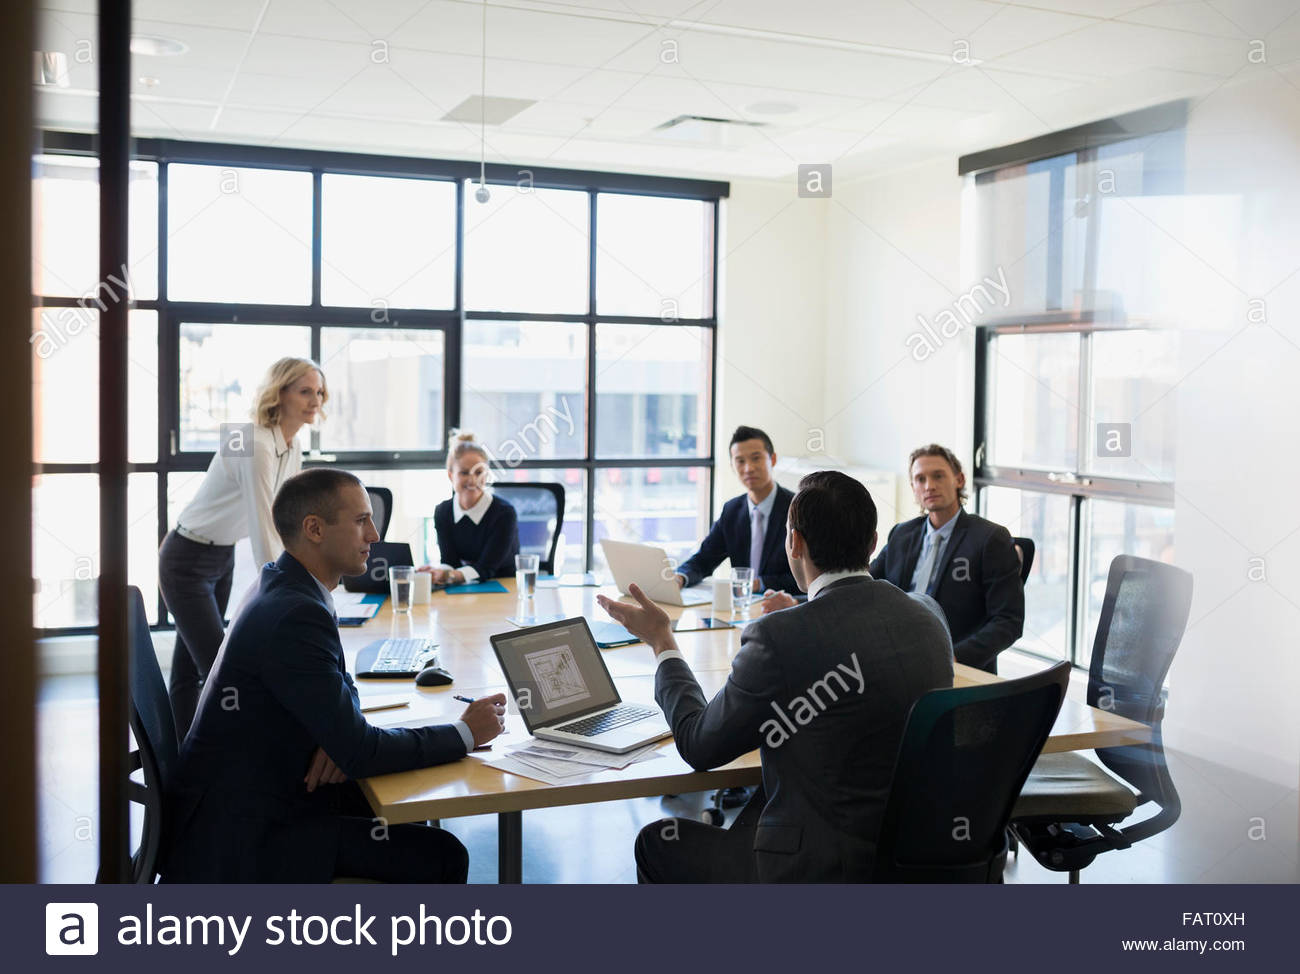 Business people talking in conference room meeting Stock Photo